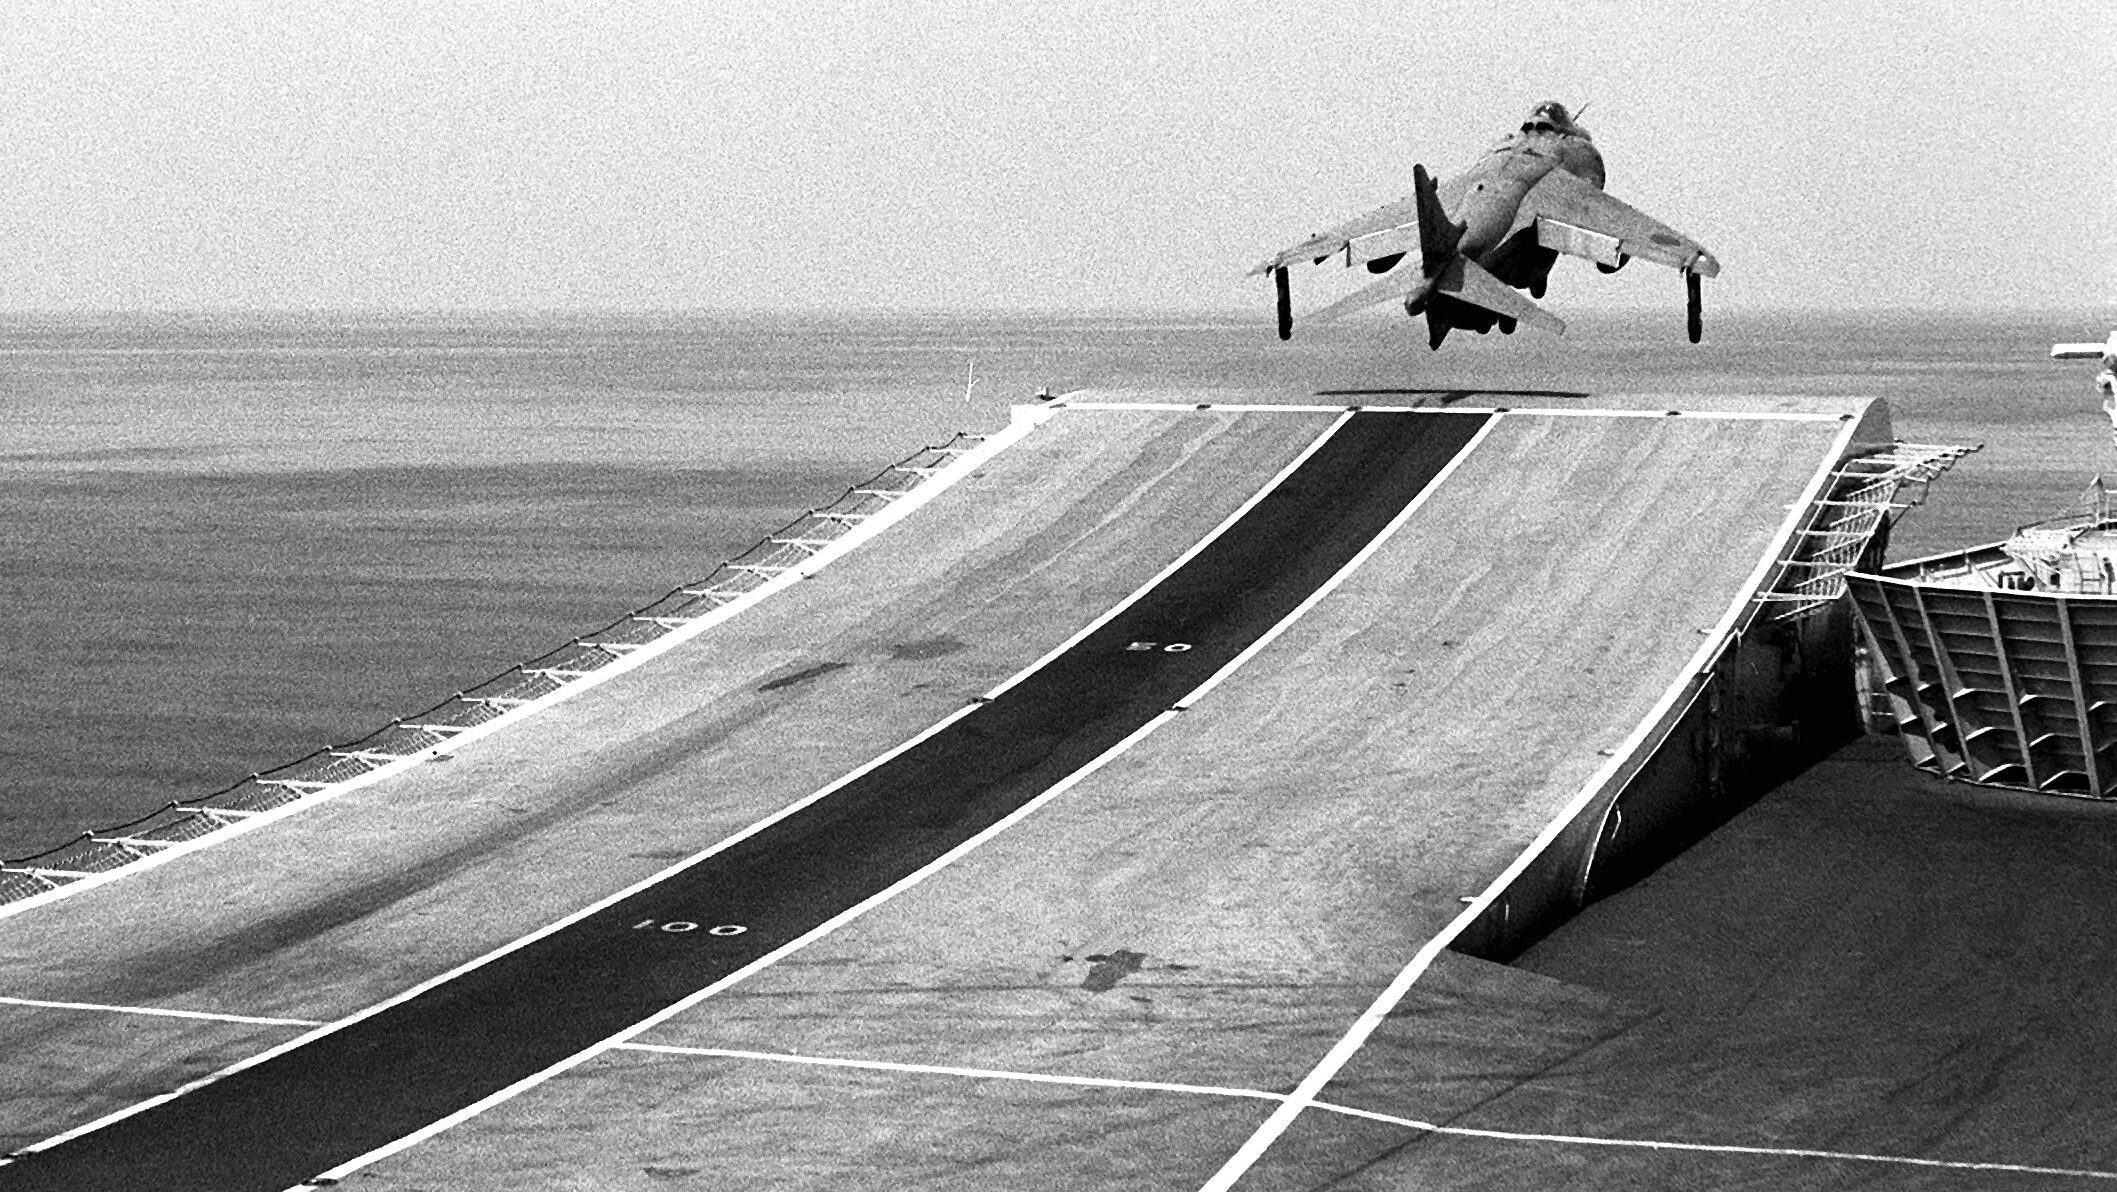 An FRS. Mark 1 Sea Harrier aircraft takes off from the flight deck of the British light aircraft carrier HMS Invincible during the NATO Southern Region exercise “Dragon Hammer” in 1990. An upward-curved ramp angled at 6.5 degrees allowed Sea Harriers to take off with a higher disposal payload. 